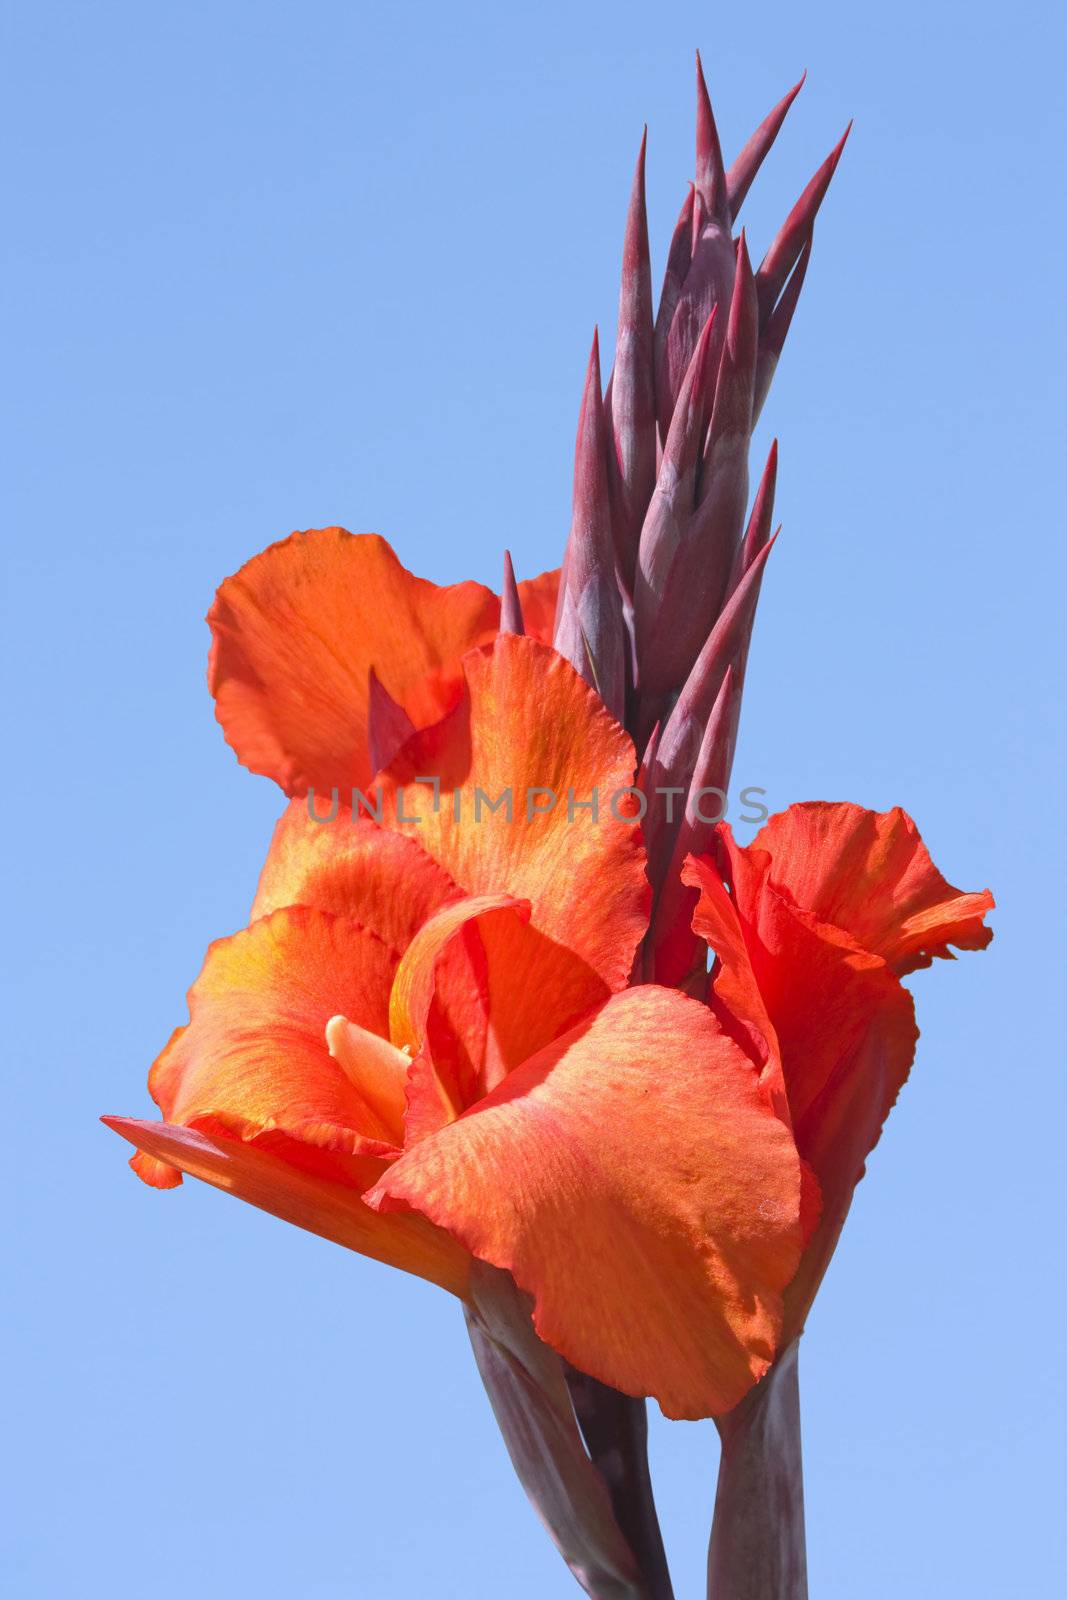 This image shows a macro from a Canna indica